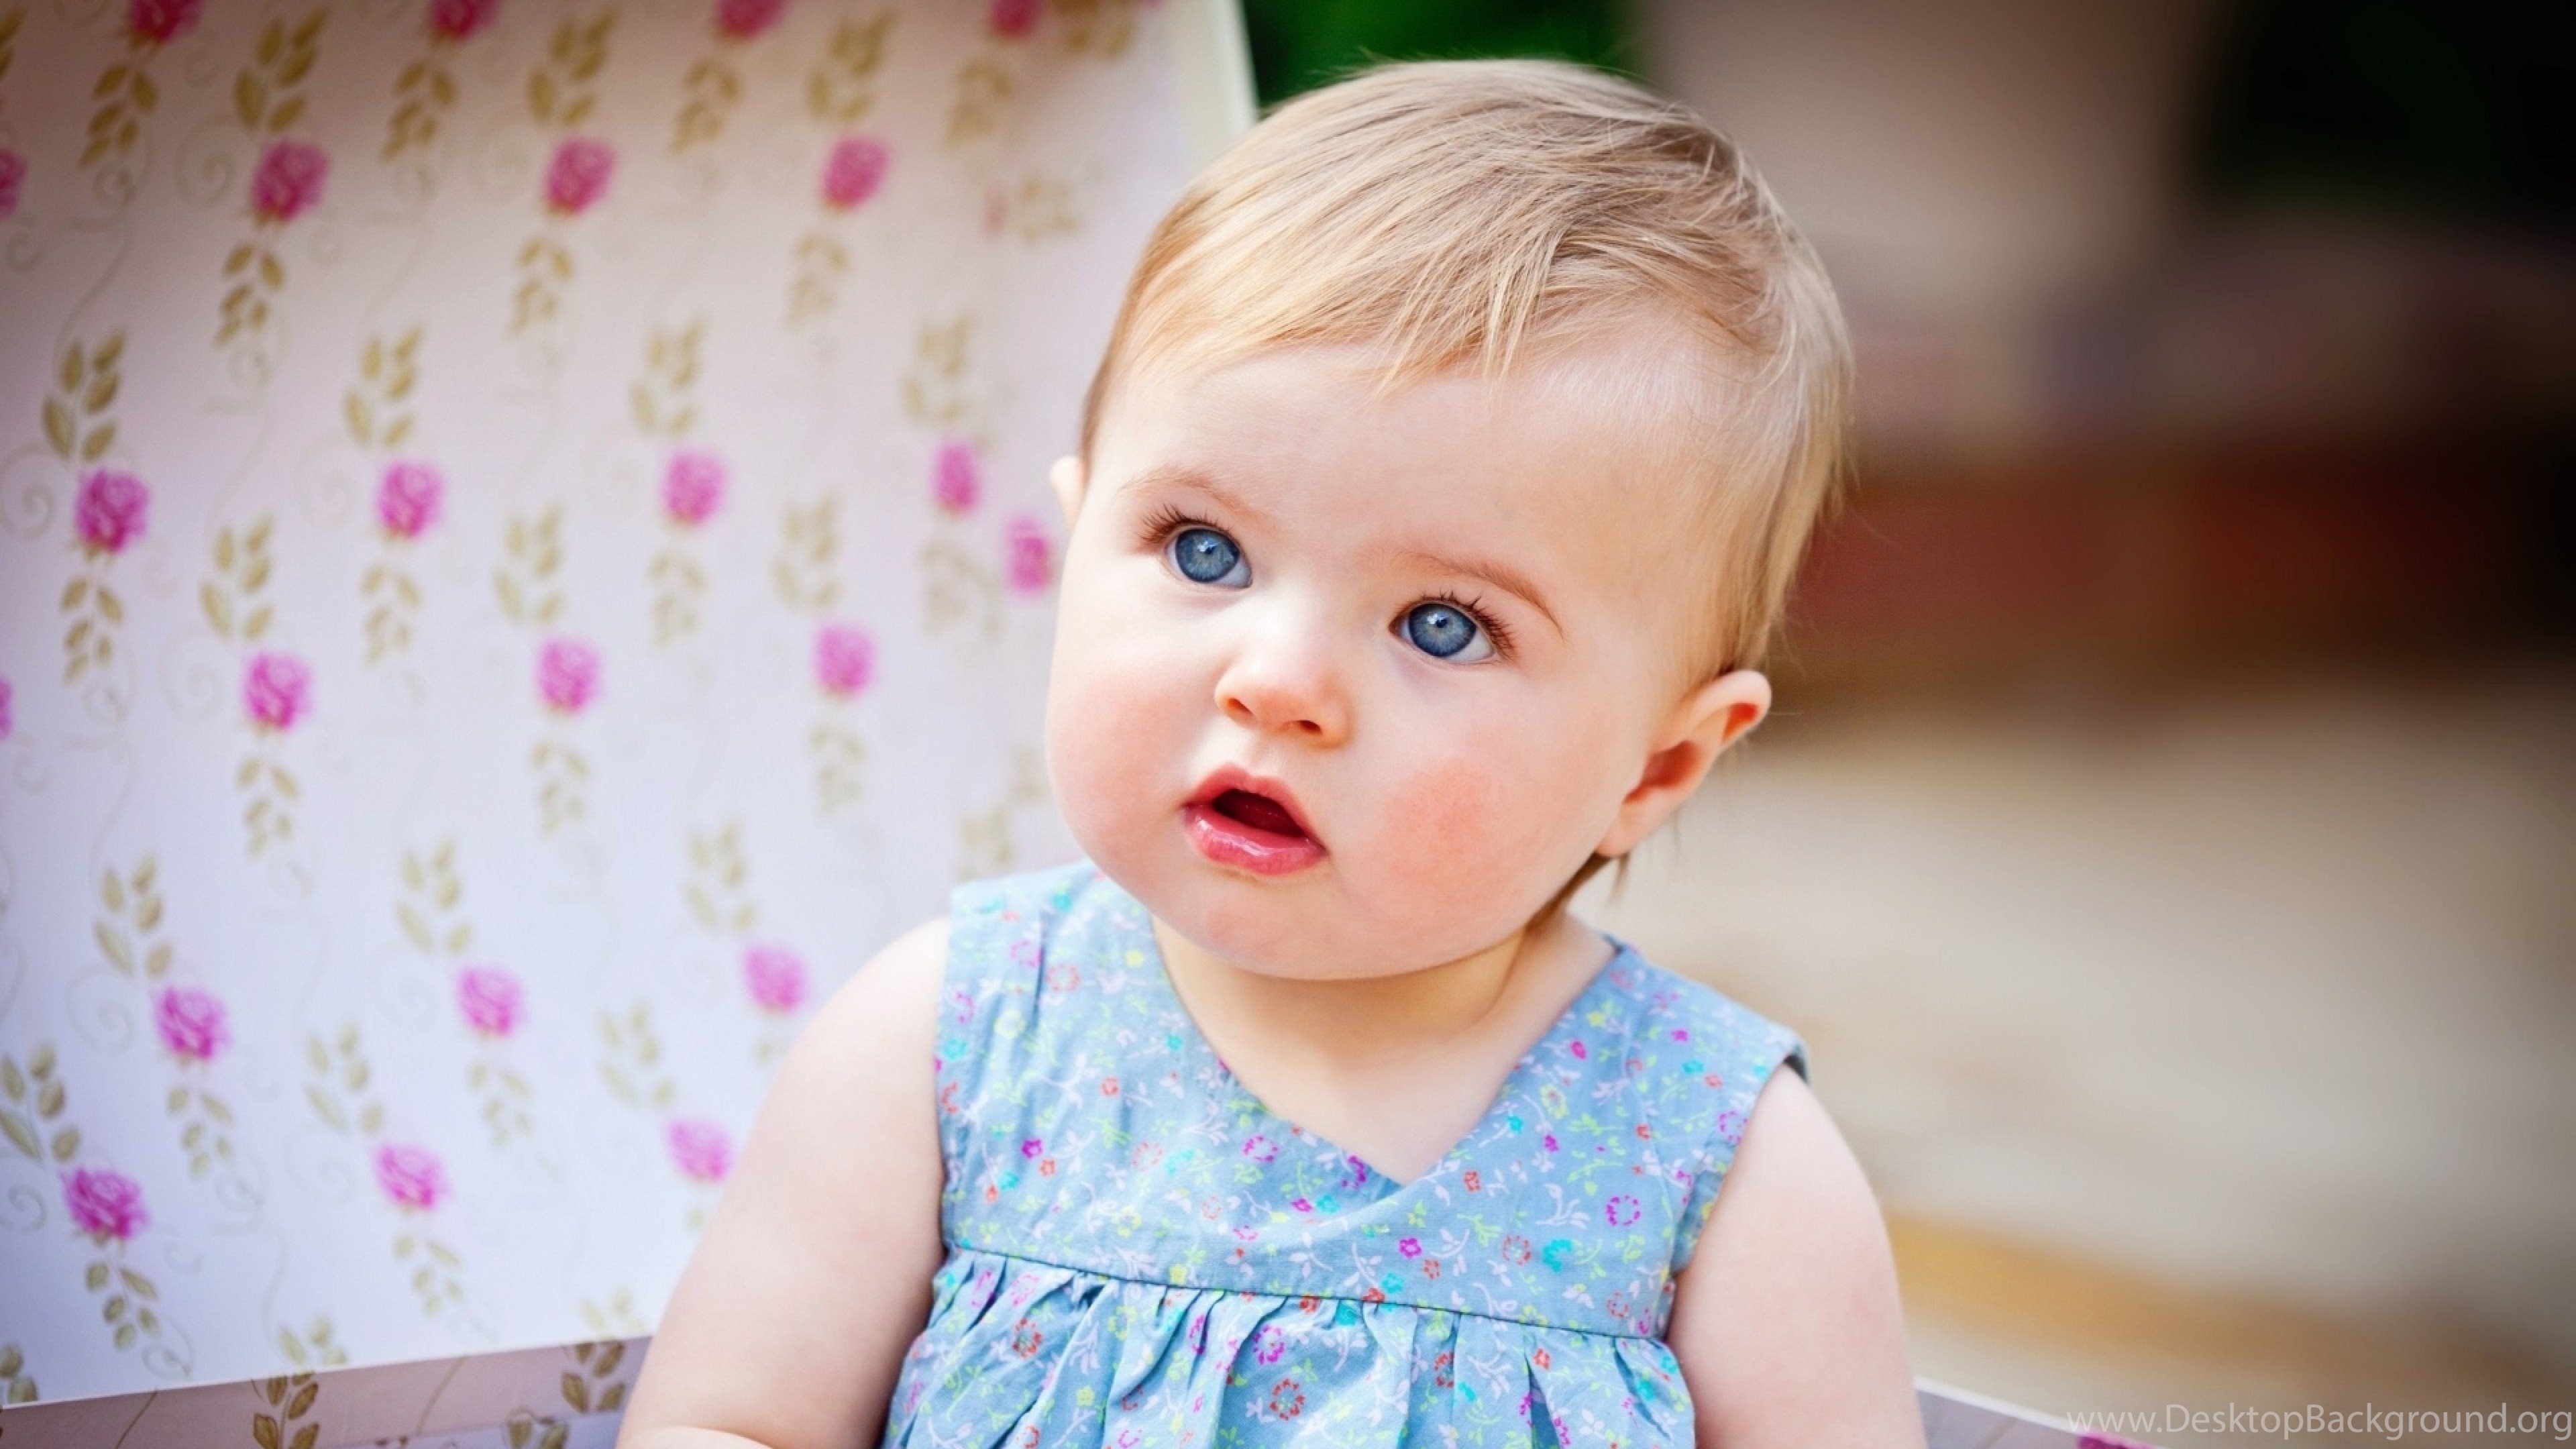 3840x2160 Wallpapers Cute Baby Girl With Beautiful Blue Eye Wallpapers